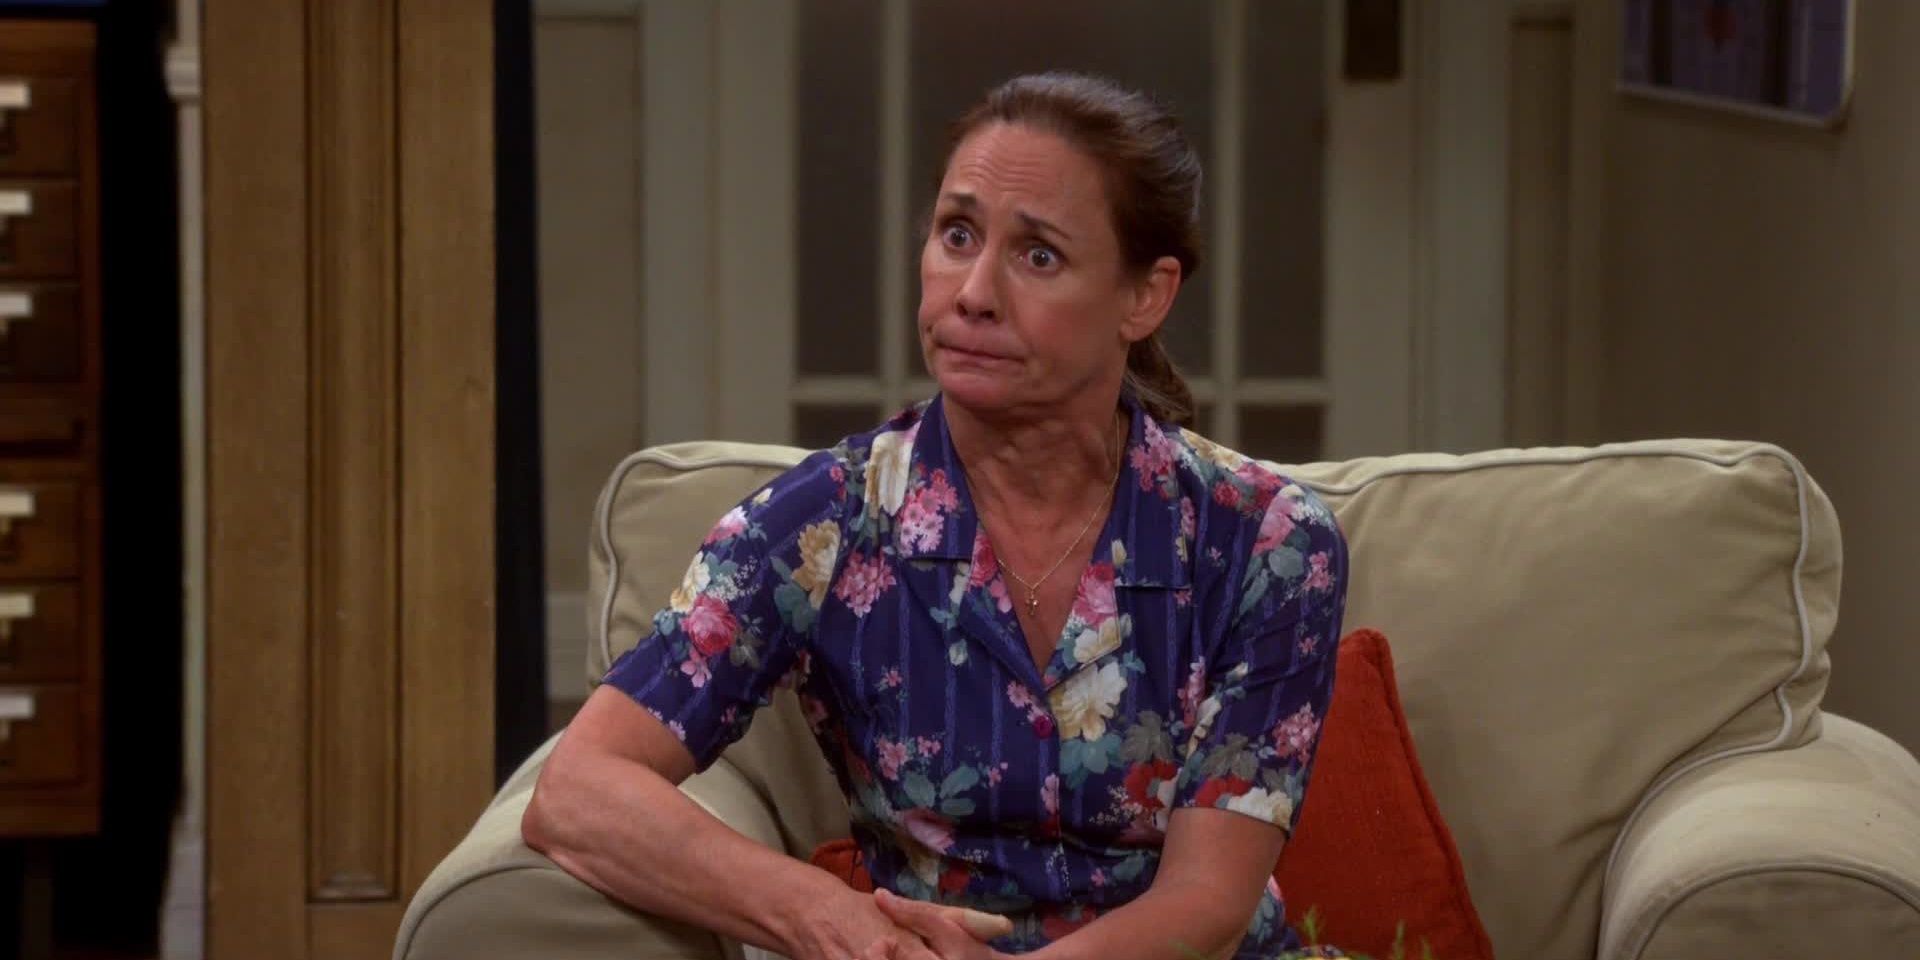 Mary Cooper complains about Sheldon while seated in an armchair in The Big Bang Theory